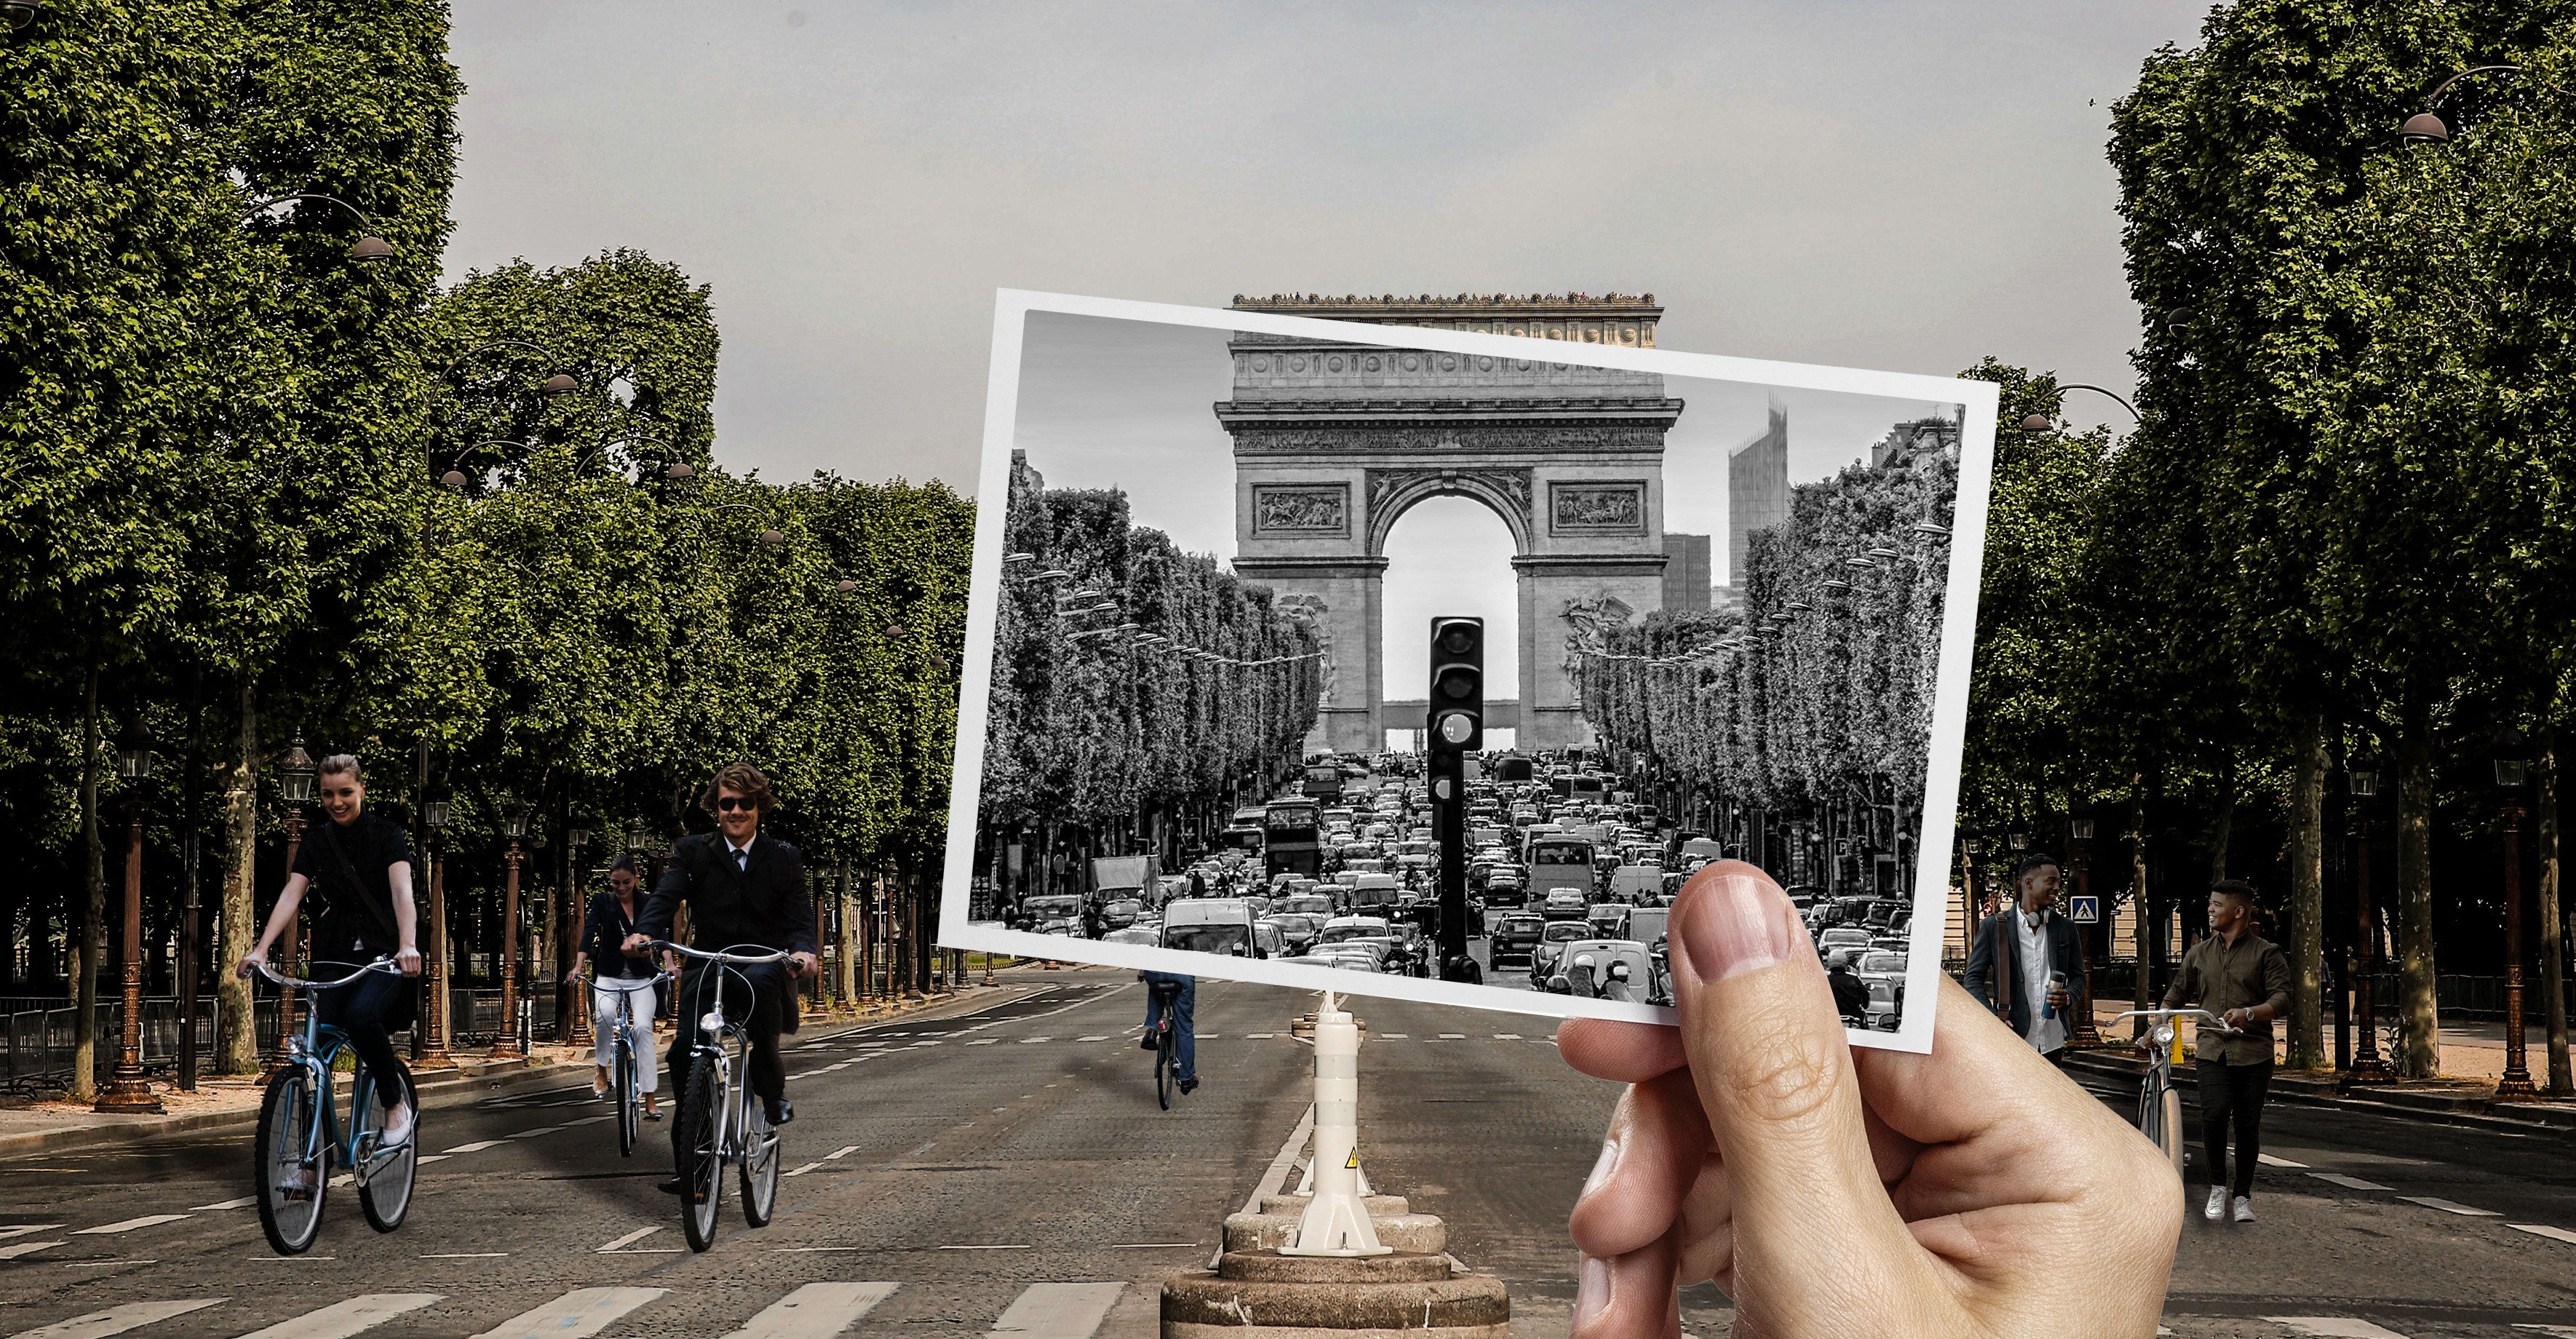 In front of the Arc de Triomphe, a hand holds a black-and-white photo of the monument, while bikers traverse the street lanes nearby.